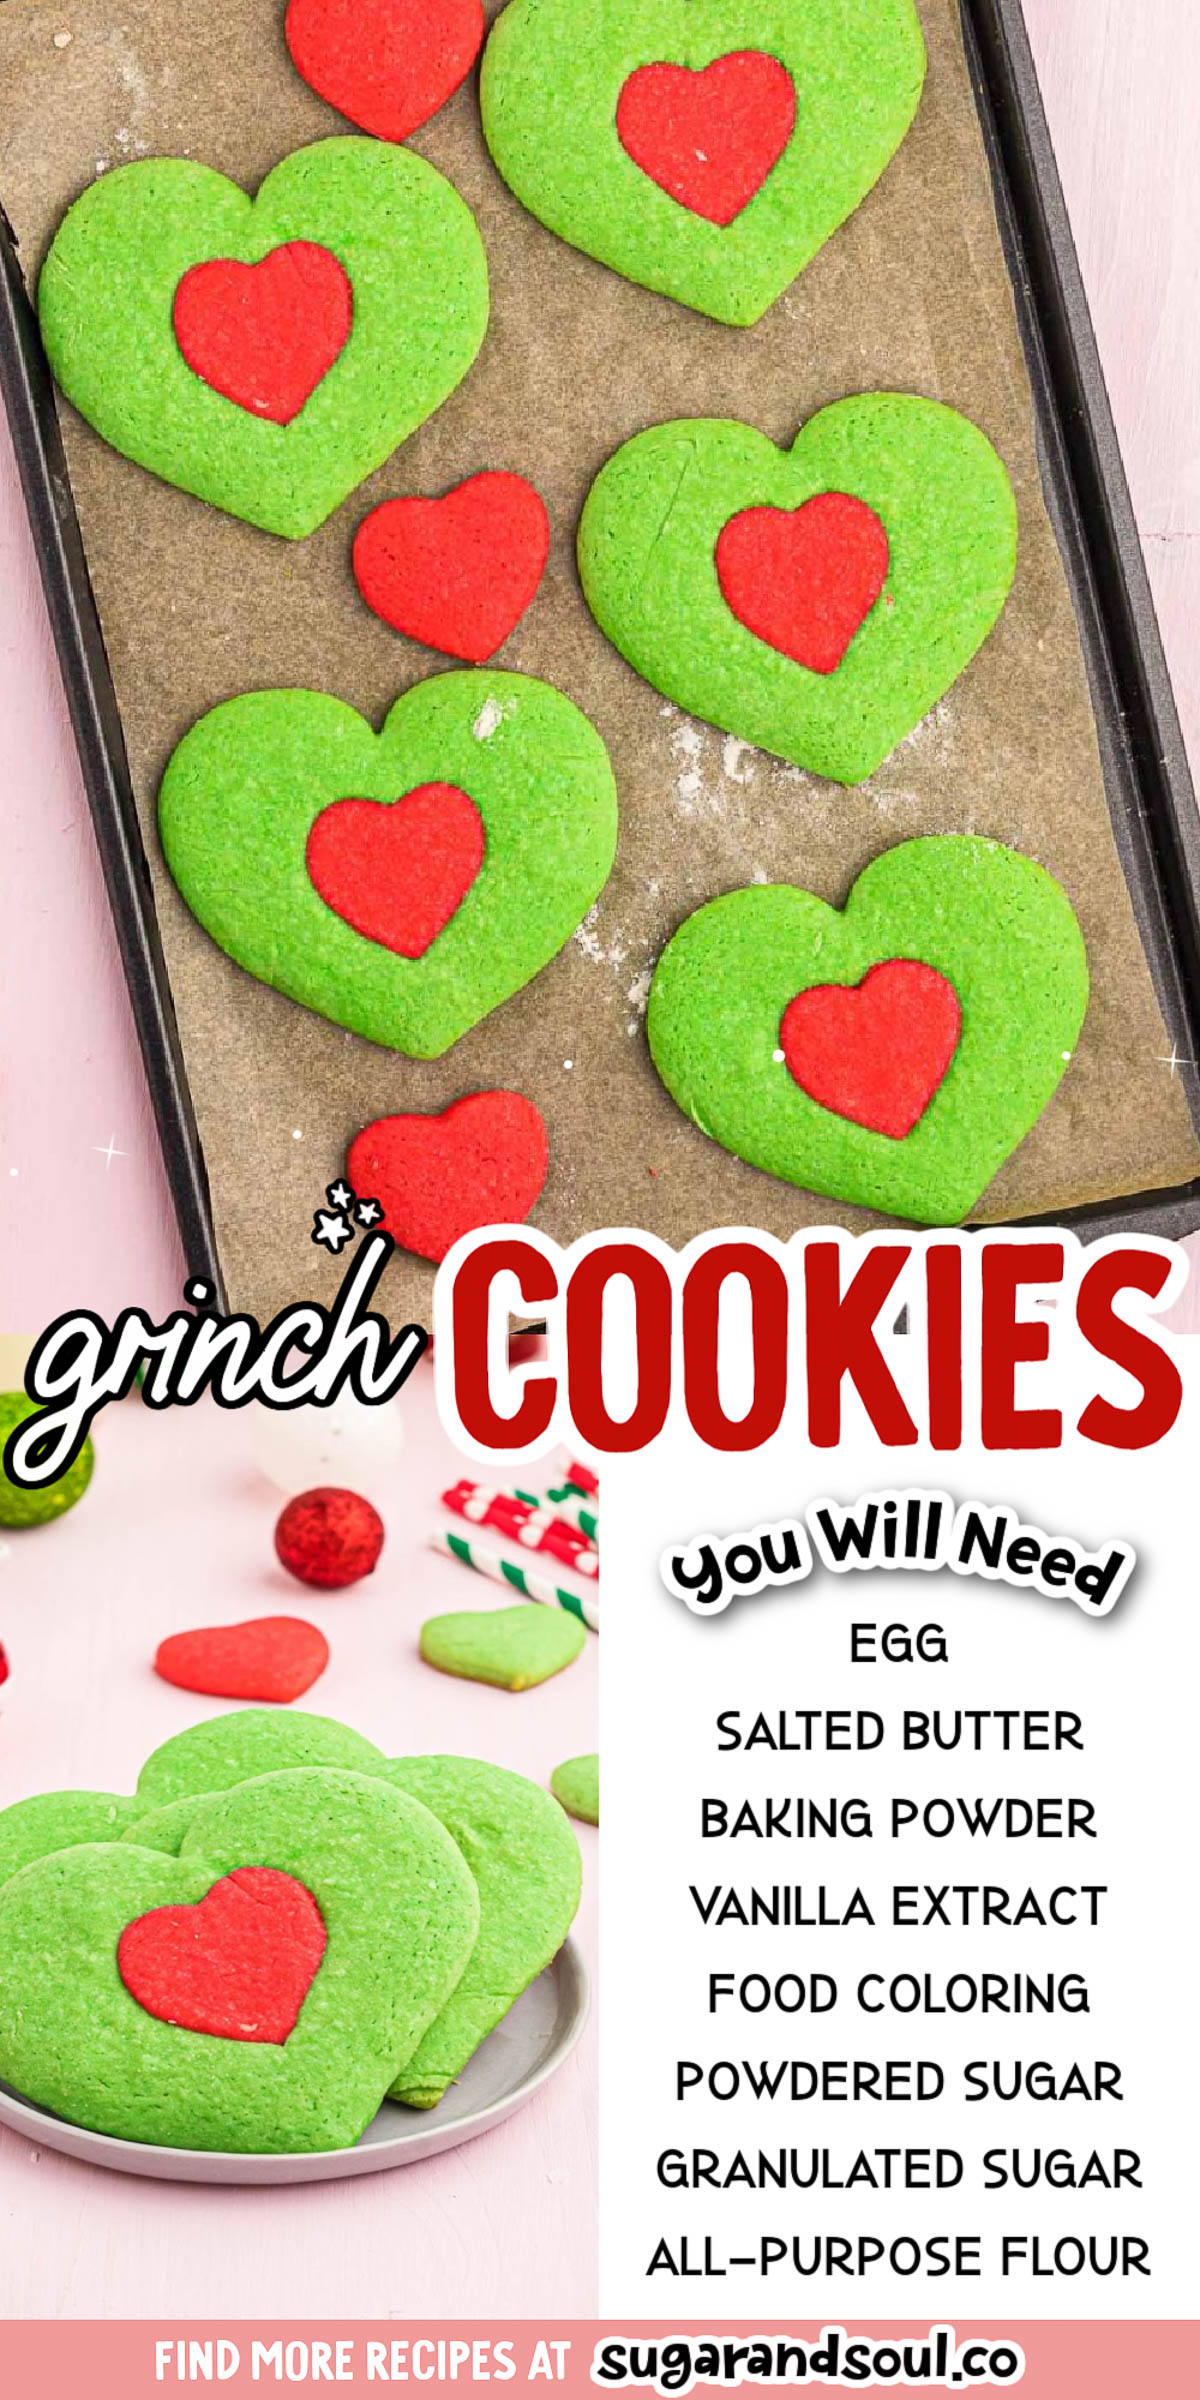 These Heart-Shaped Grinch Cookies were inspired by the most recent adaptation of How The Grinch Stole Christmas! Made with a basic sugar cookie dough and colored red and green to create the cutest cookies of the season! via @sugarandsoulco